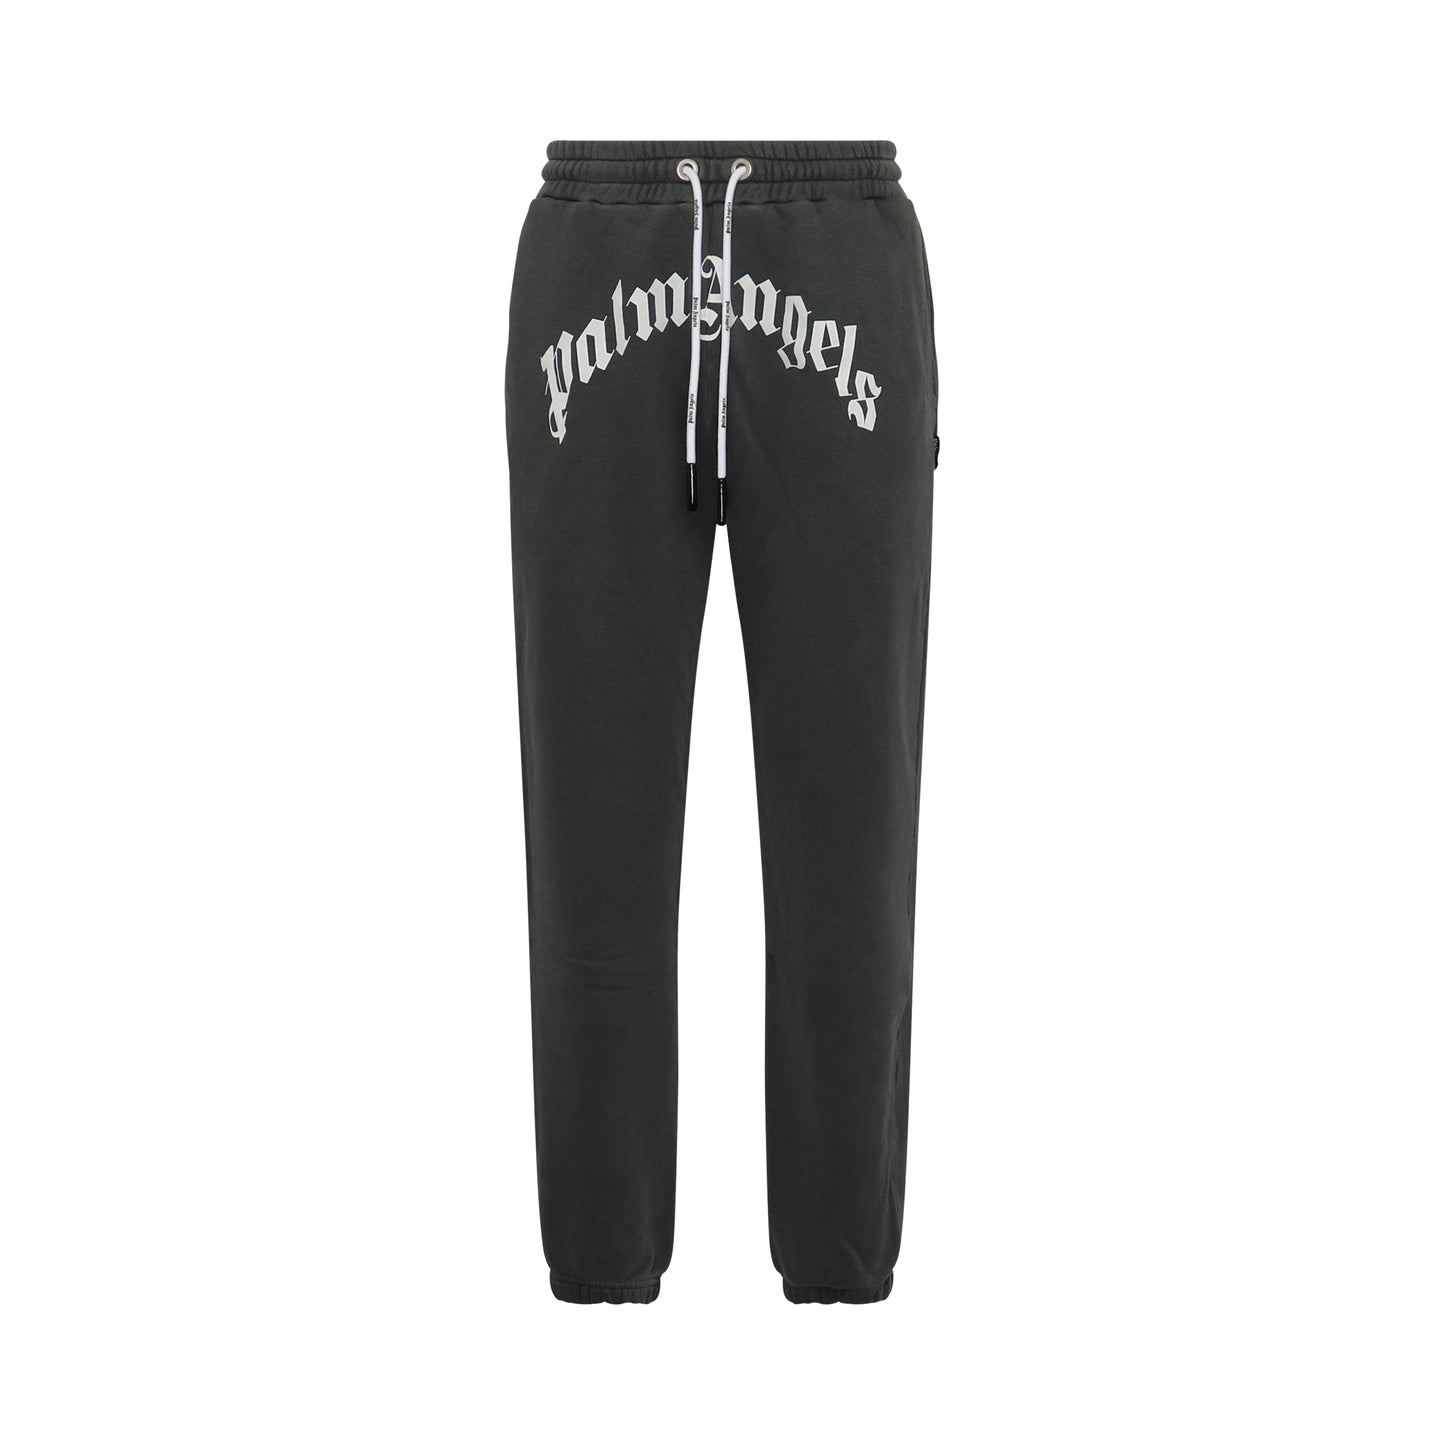 Gd Curved Logo Sweatpants in Black